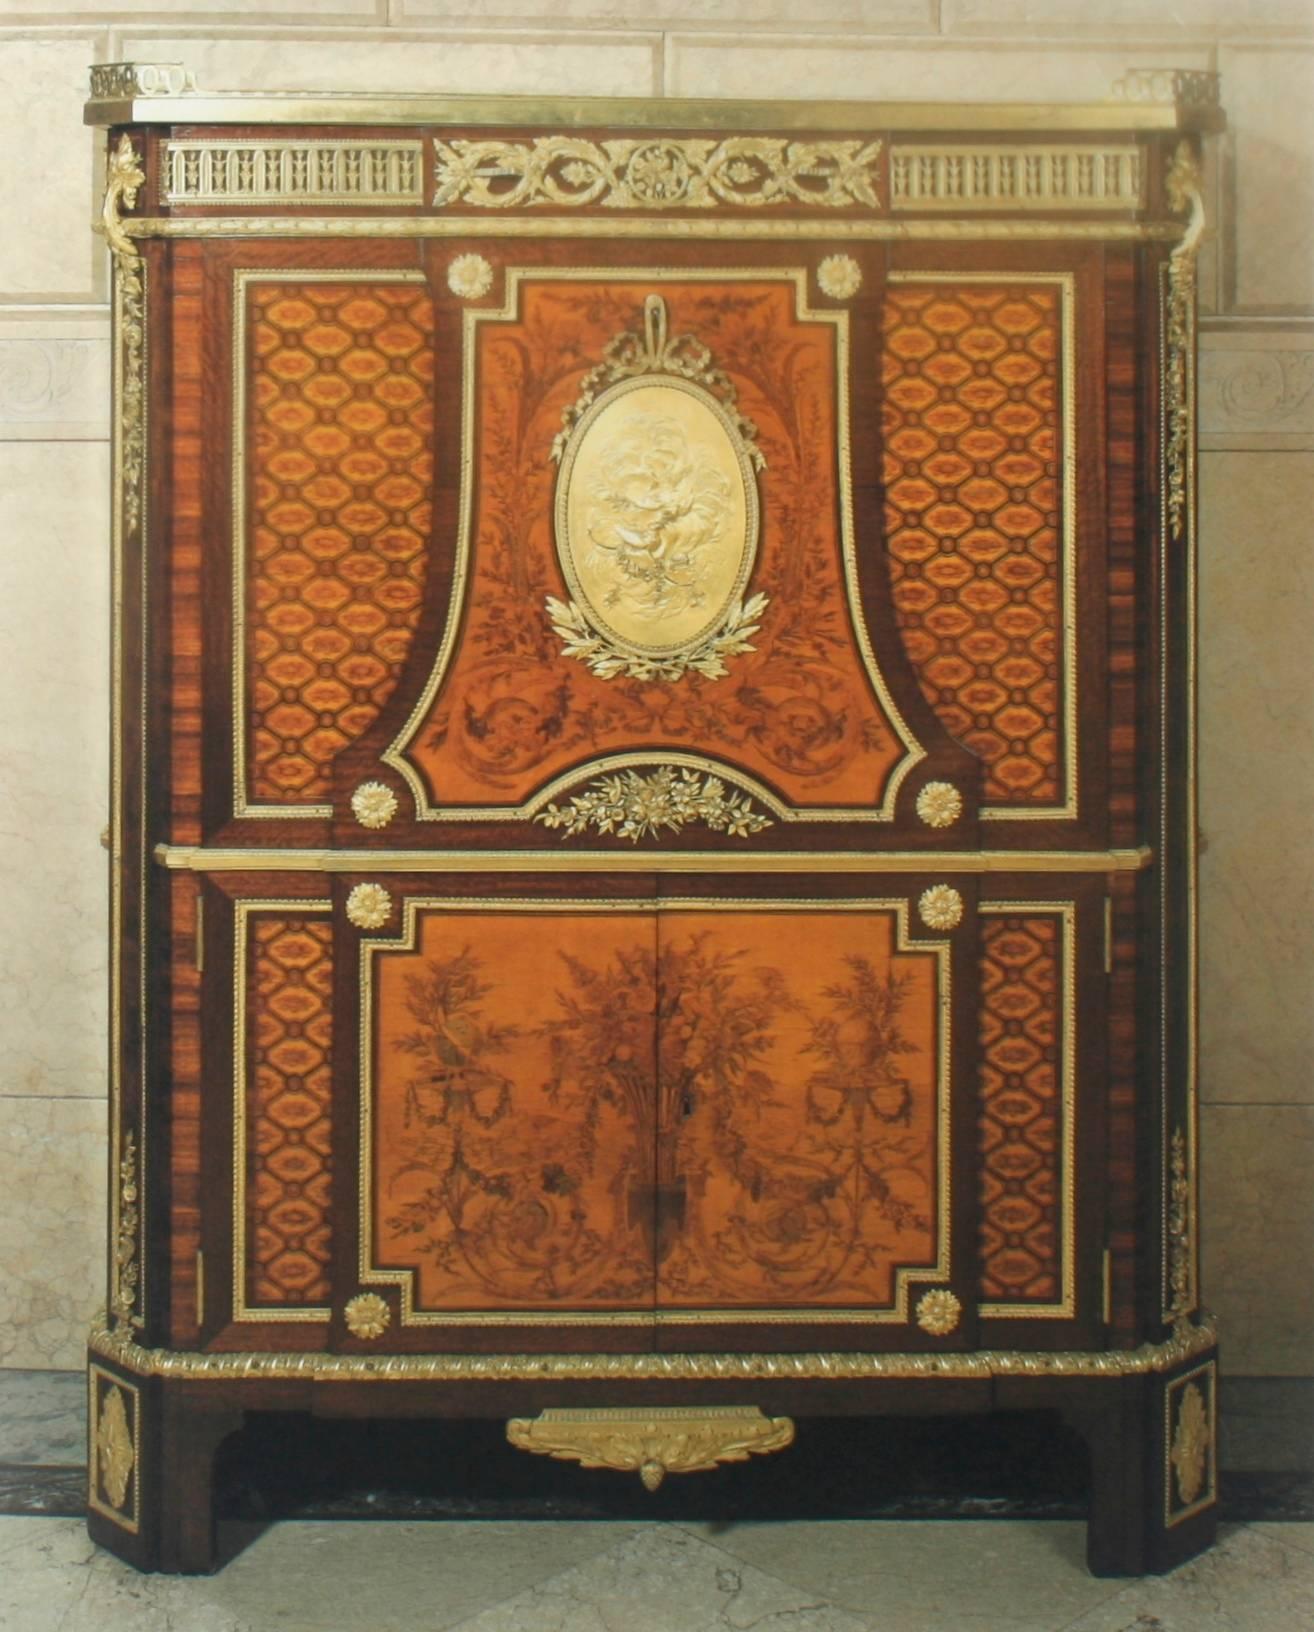 20th Century Furniture in The Frick Collection by Theodore Dell, 1st Edition